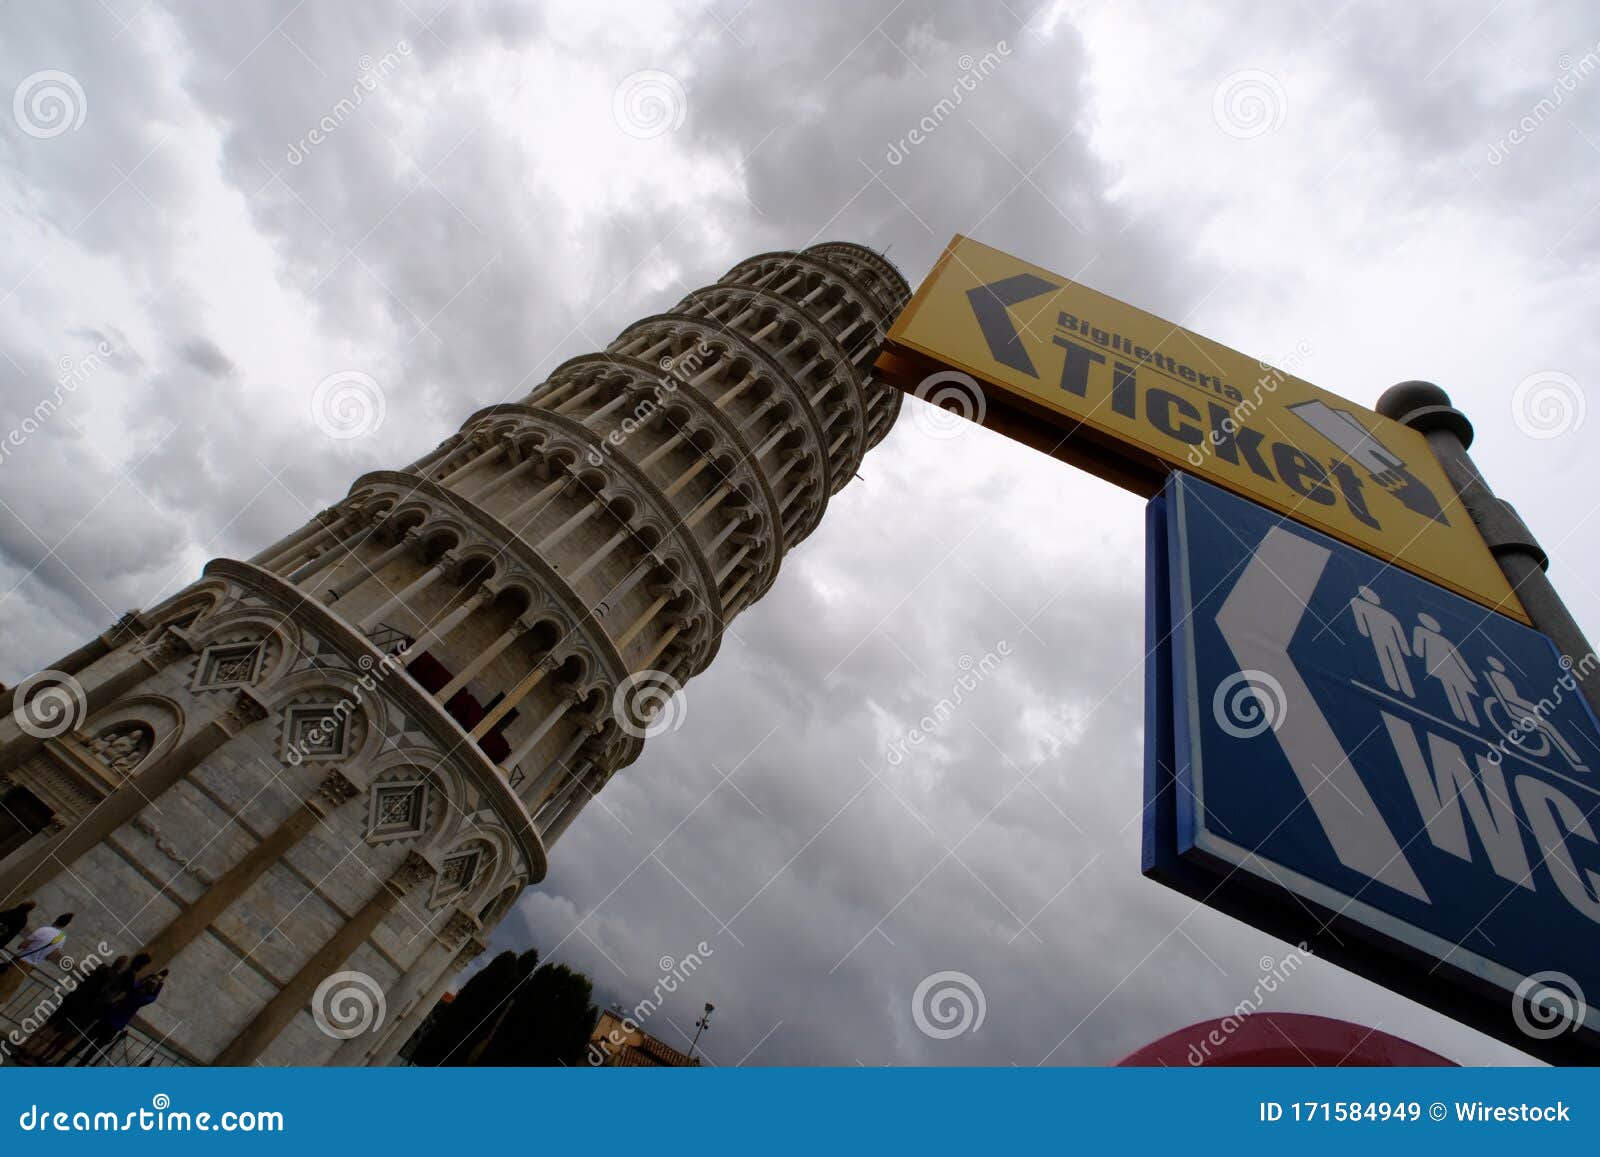 turism in italy, pissa tower signs and posts